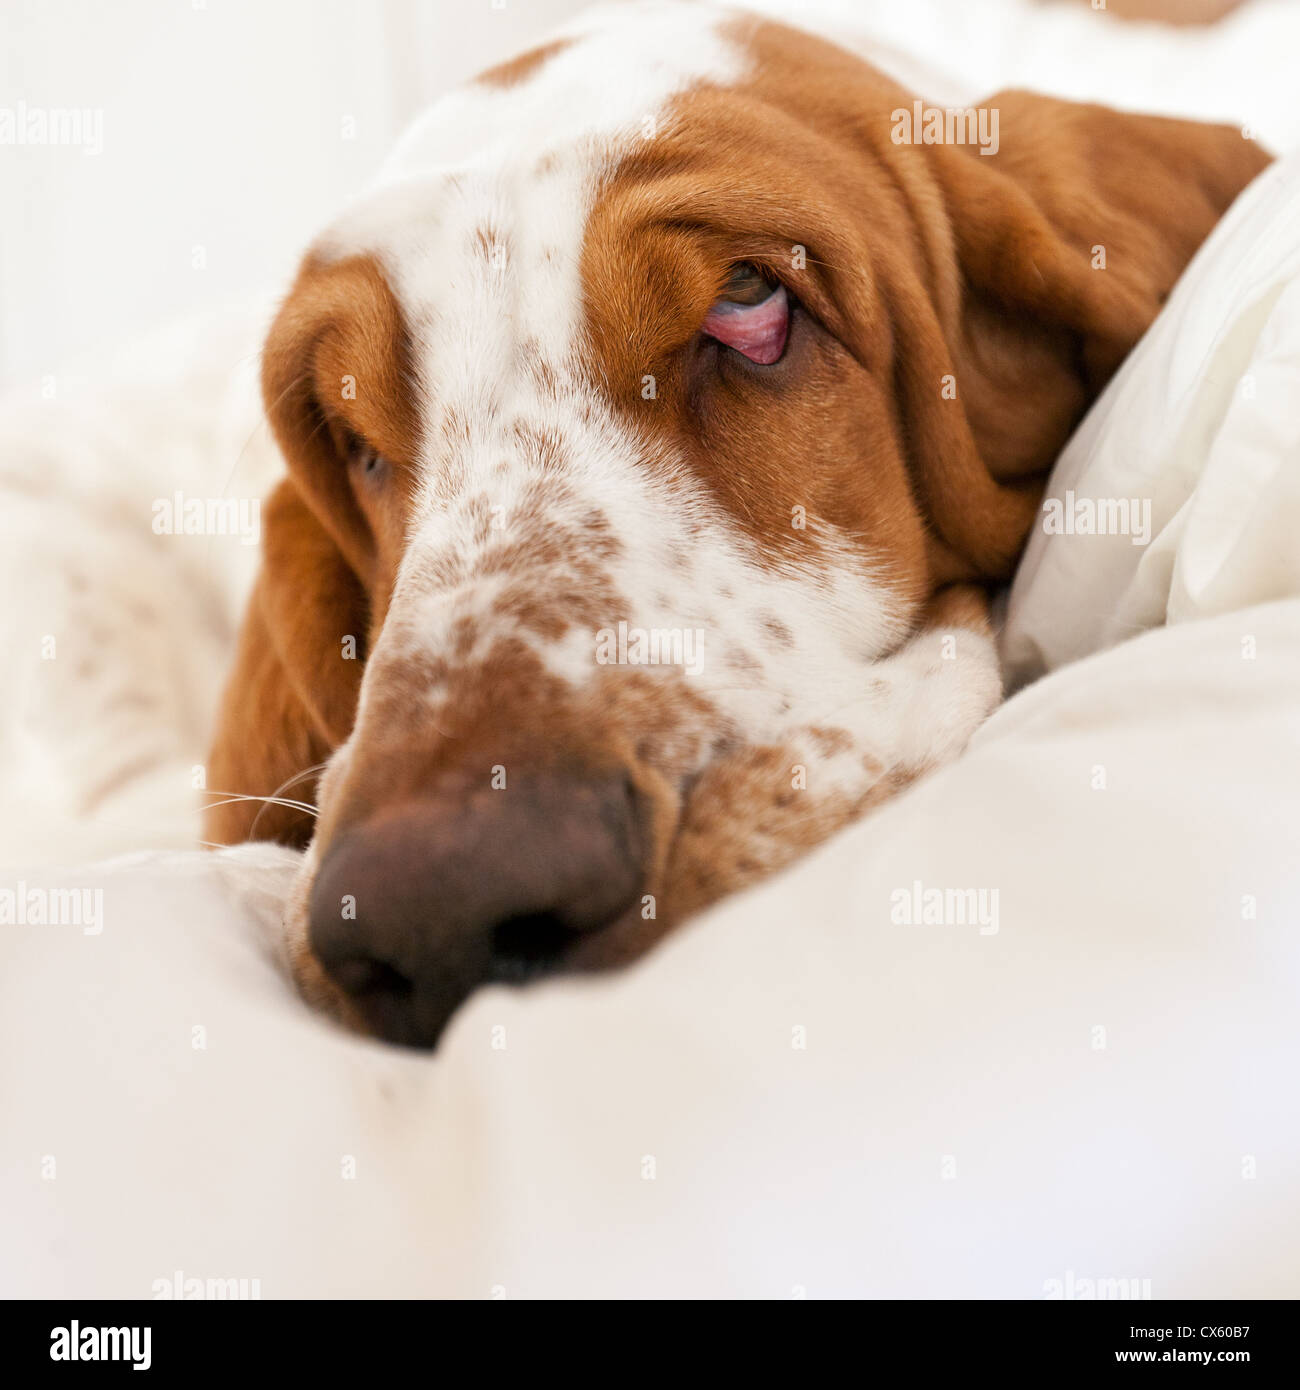 Extreme close-up of a sad-looking basset hound lying in its bed. Stock Photo